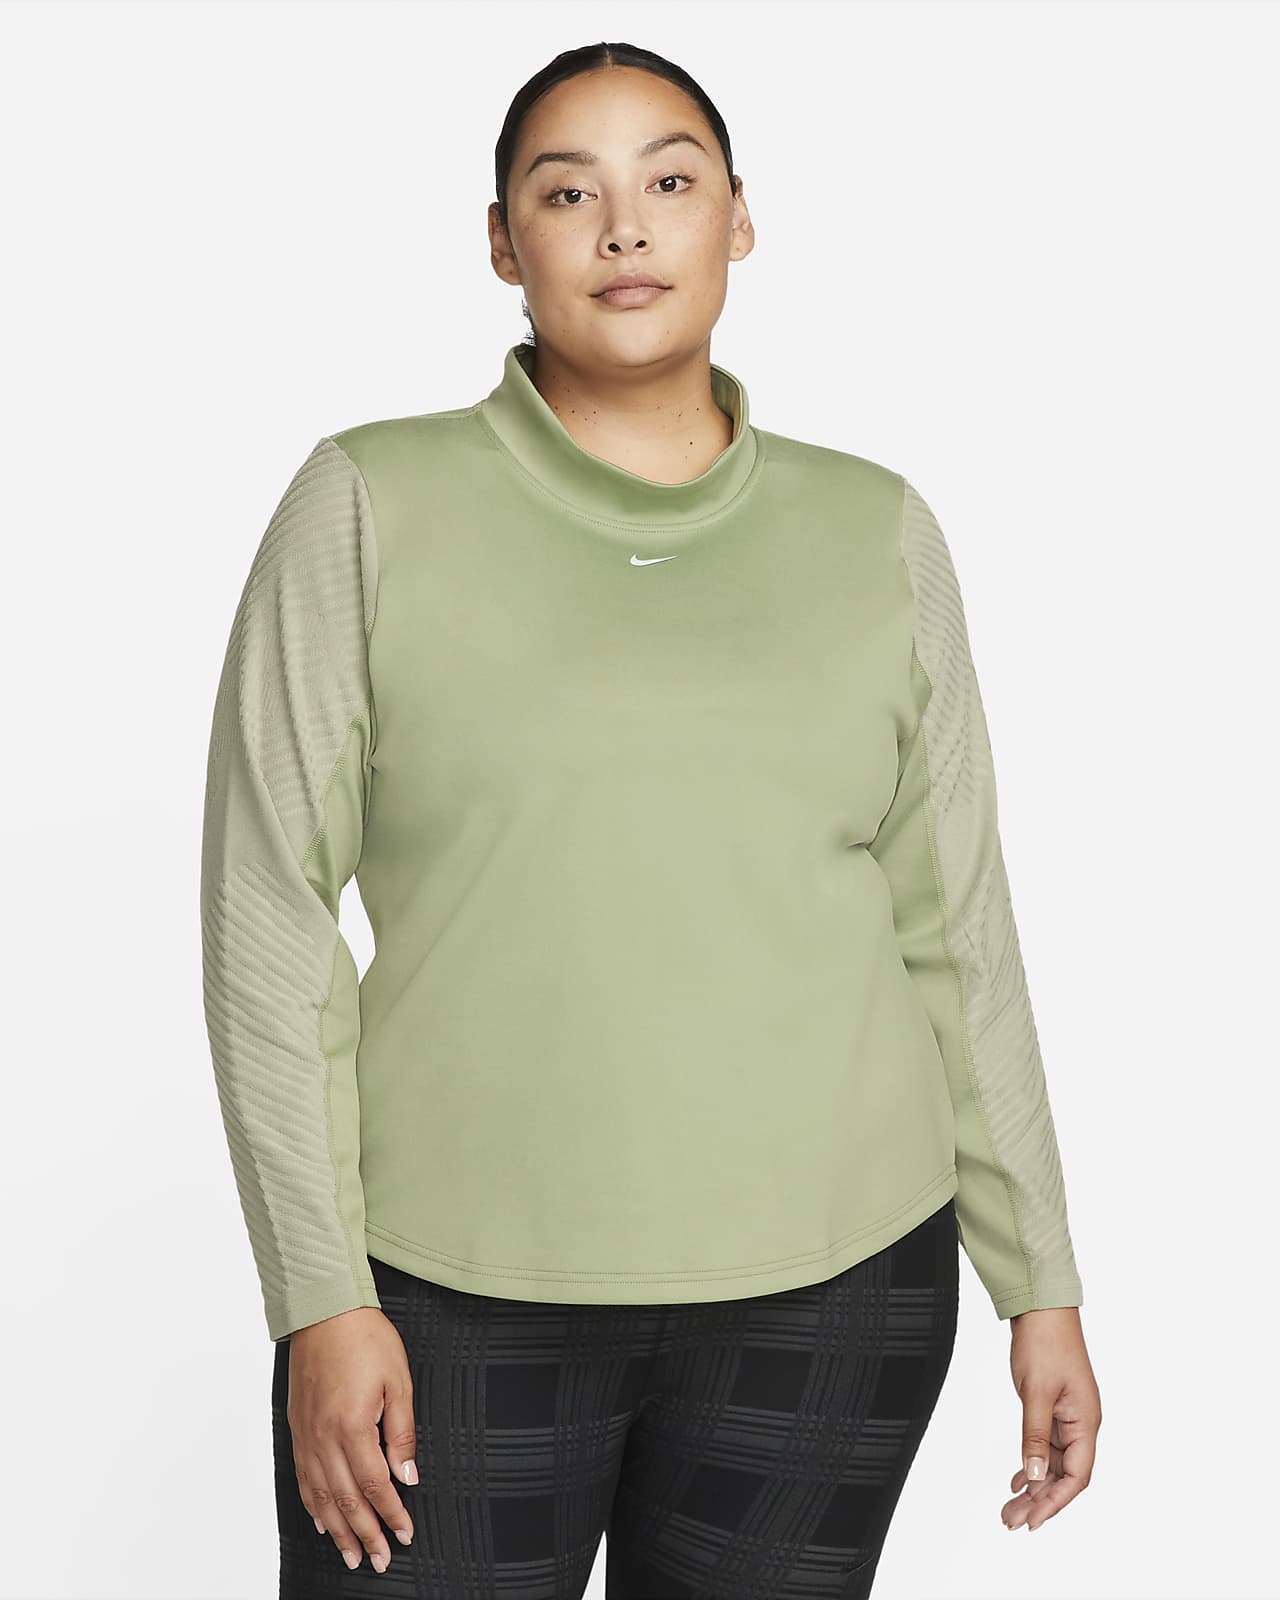 Nike Pro Therma-FIT ADV Women's Long-Sleeve Top (Plus Size)